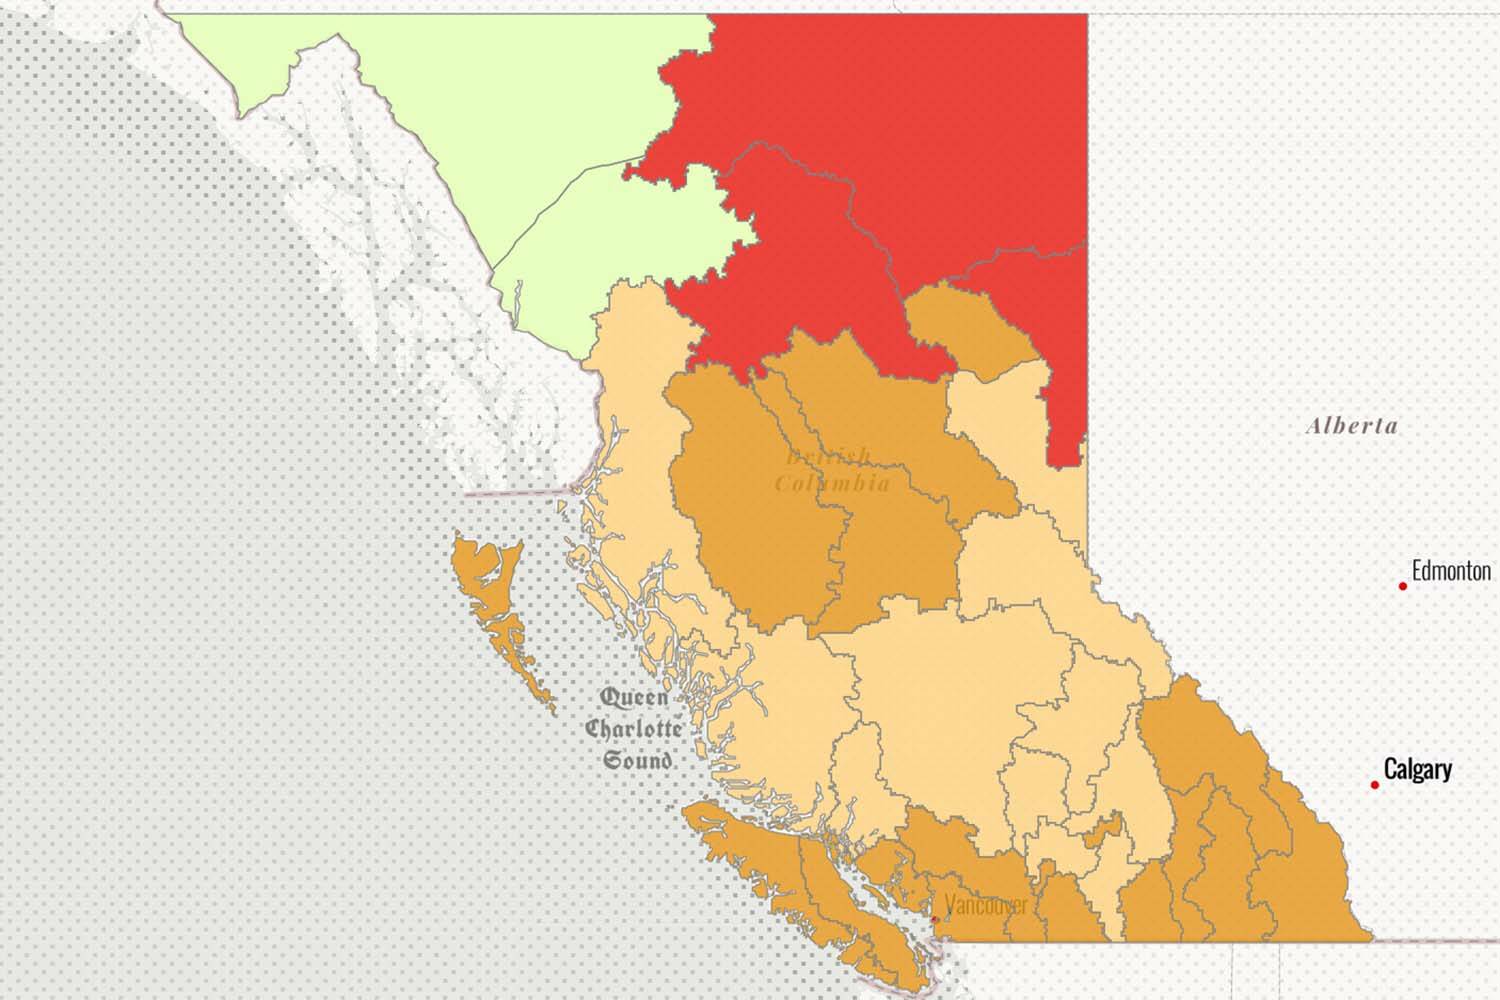 The provincial government is urging British Columbians to conserve water as forecasts call for drought conditions across much of the province. The northeastern corner of the province is already under the second-worst drought rating.